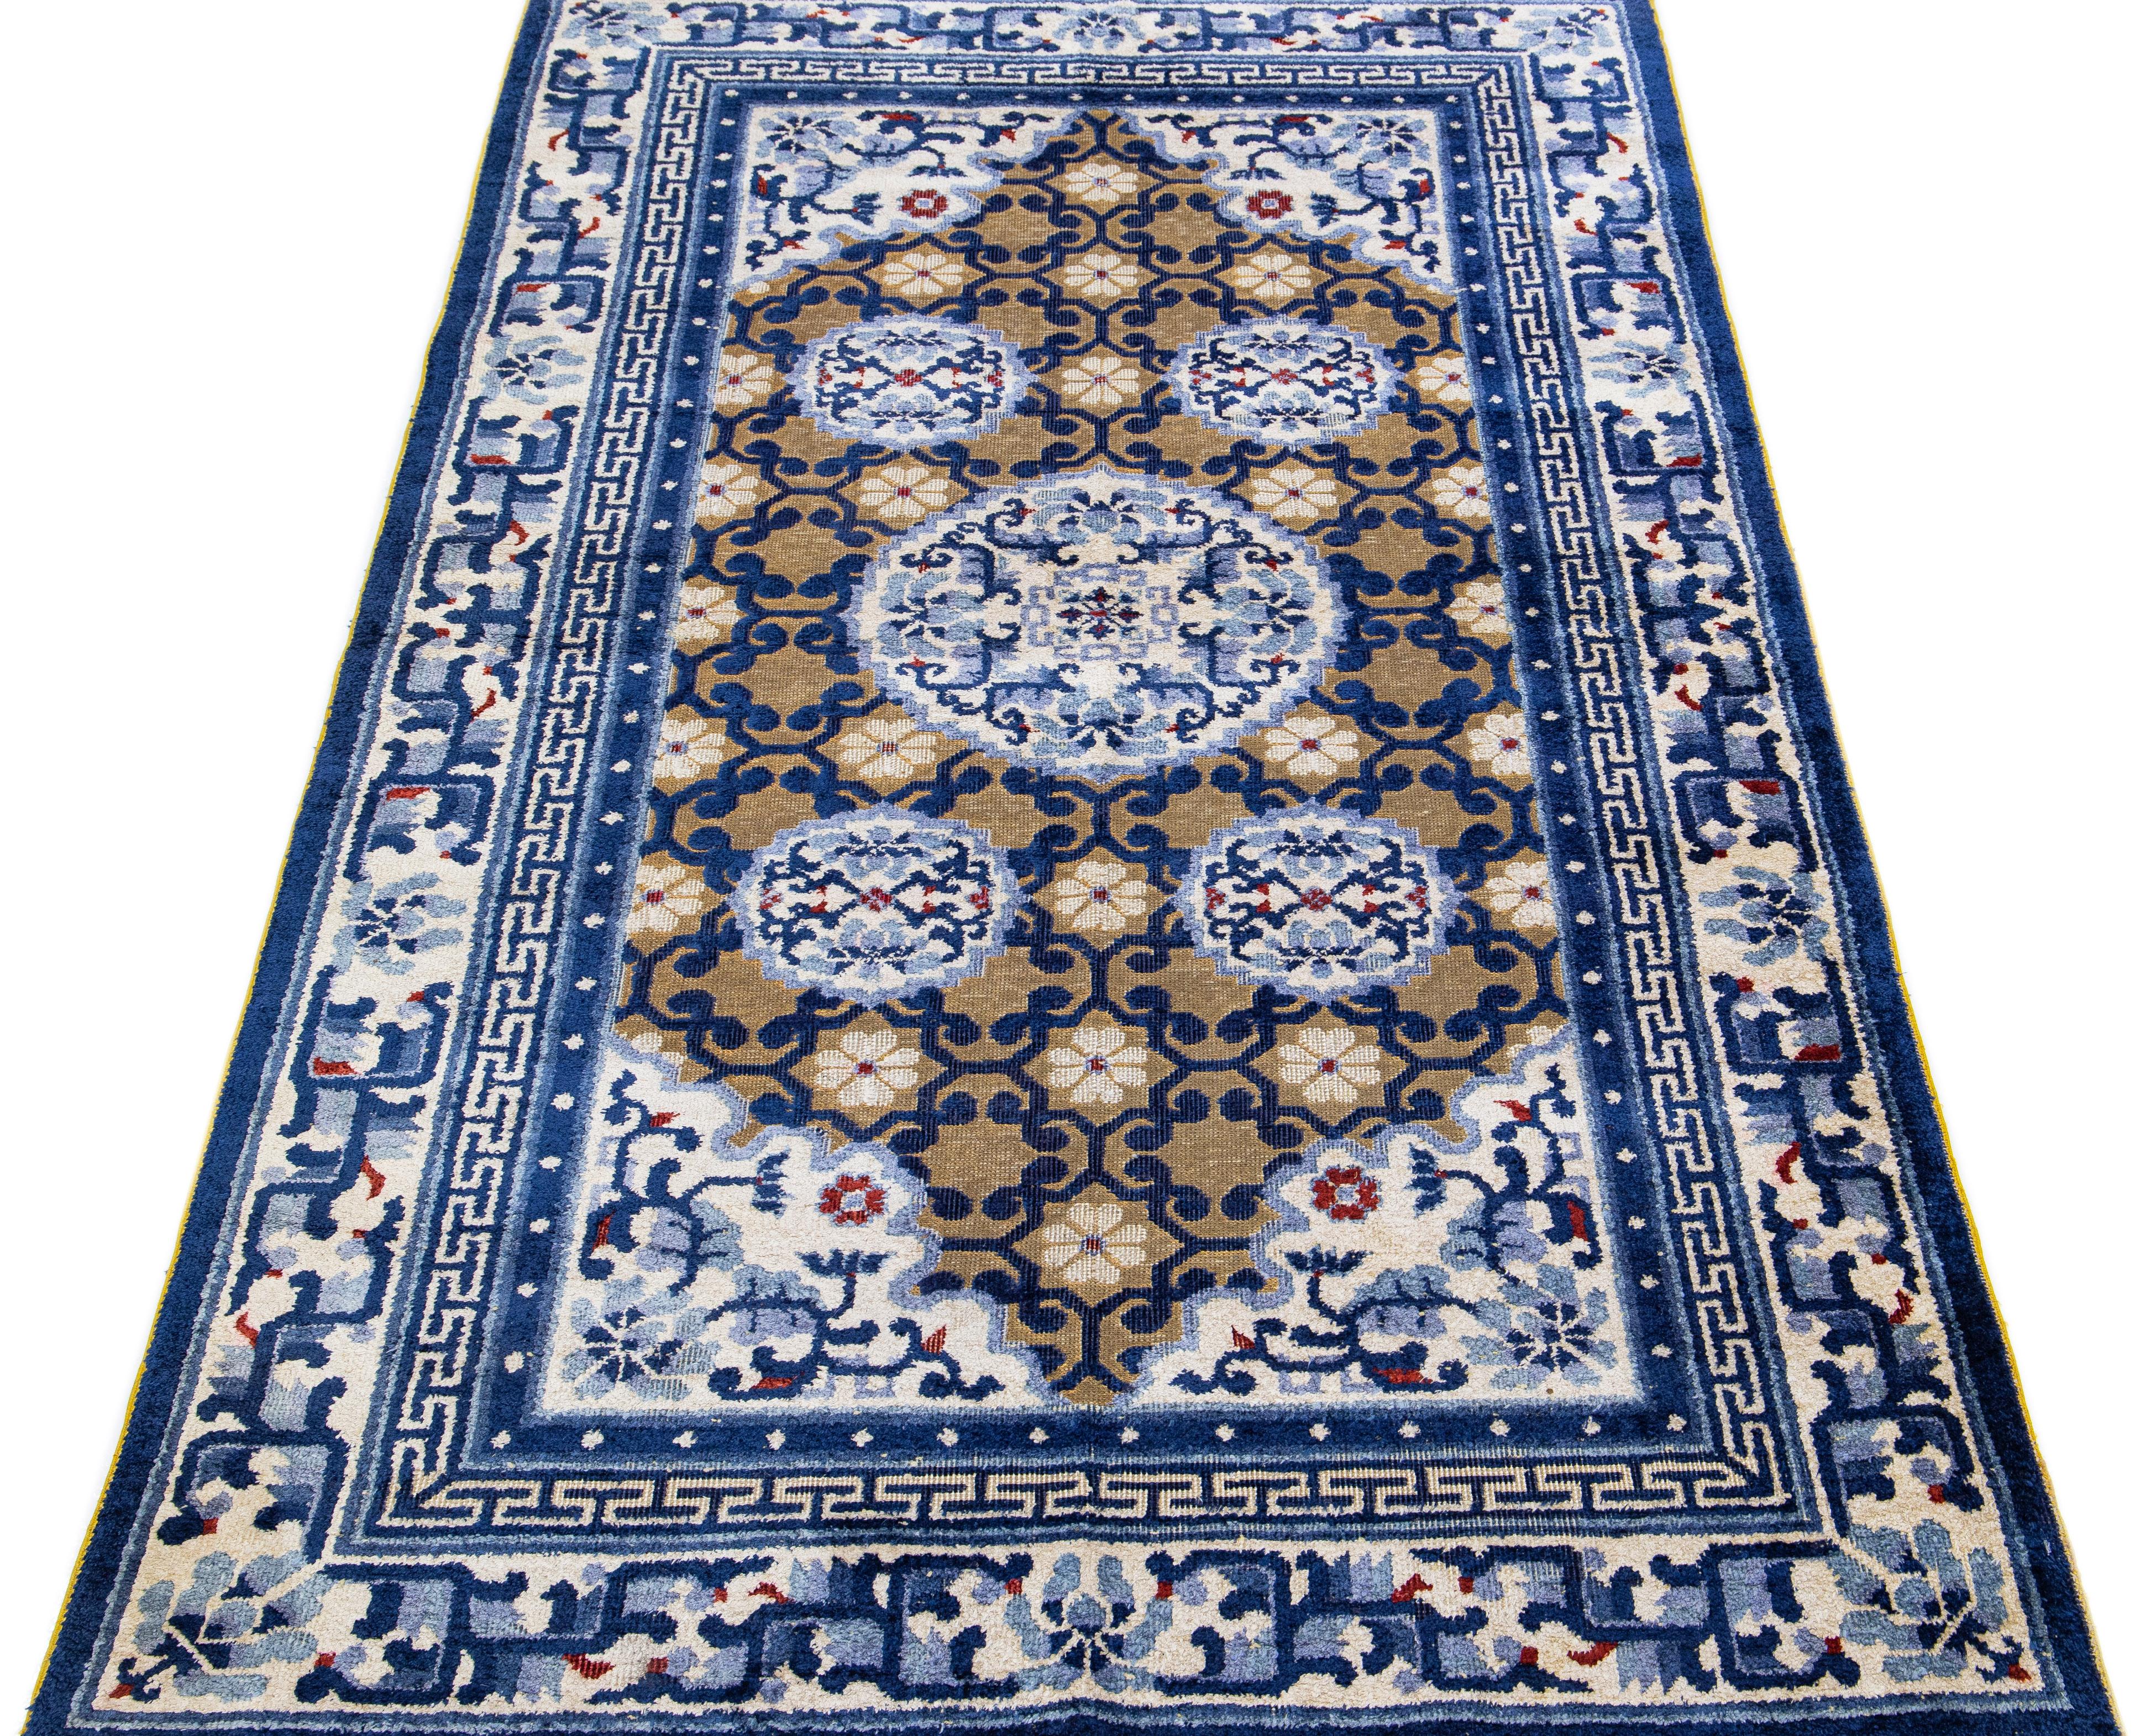 Transform the look of your home with this incredible antique Chinese Peking wool rug. This unique handmade piece is defined by its rustic brown field accompanied by cheerful blue medallion accents. Instantly bring traditional Chinese style to your